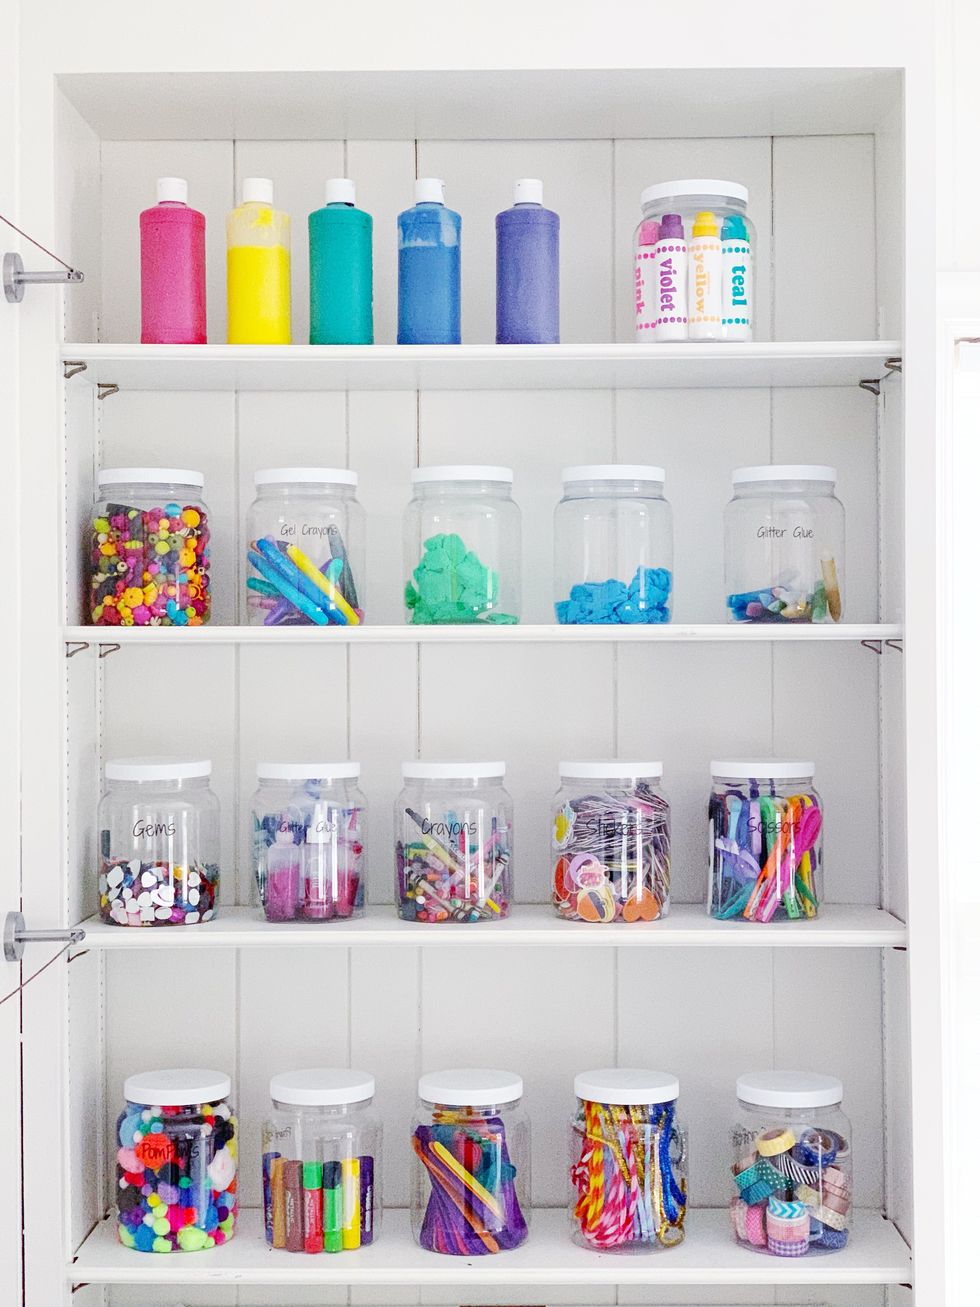 https://hips.hearstapps.com/hmg-prod/images/craft-room-art-supplies-storage-toy-organizer-ideas-country-living-1568923989.jpeg?crop=1xw:1xh;center,top&resize=980:*